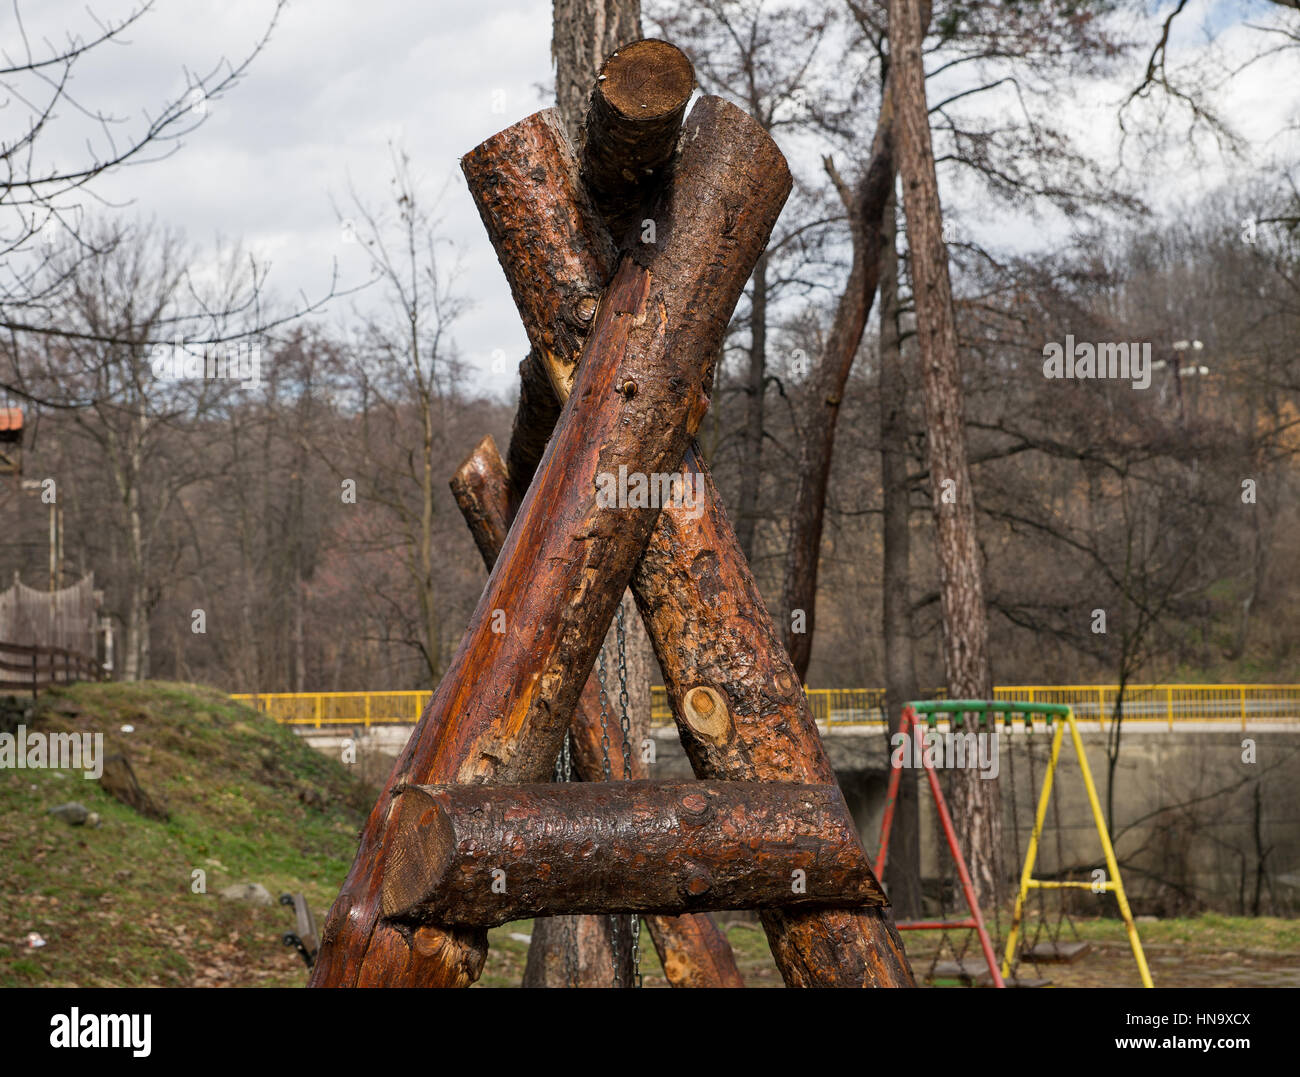 Wooden structure for a swing details Stock Photo